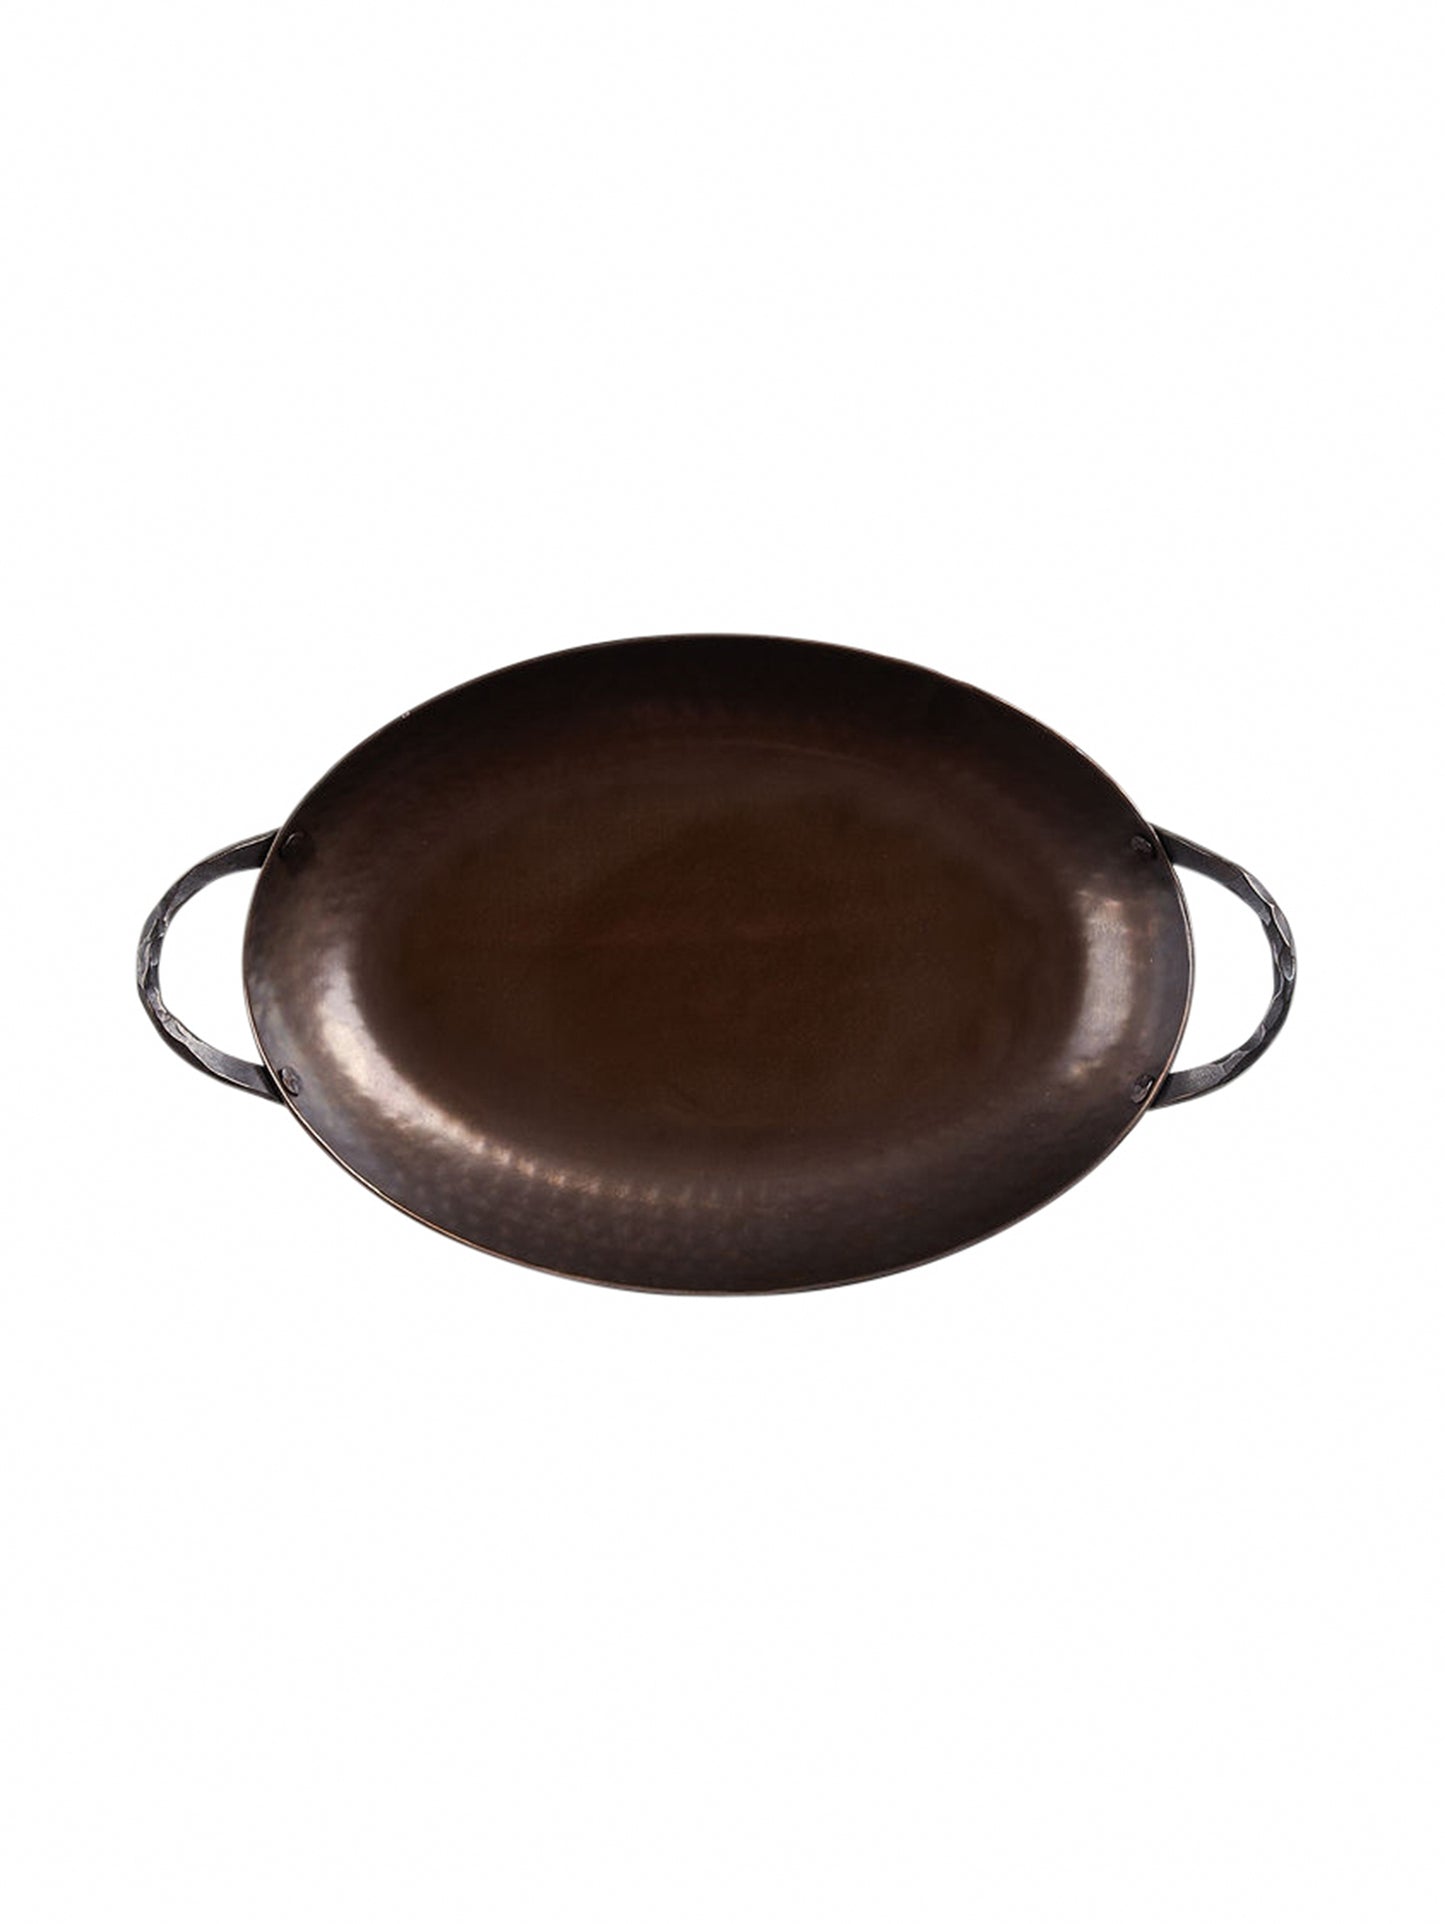 Smithey Hand Forged Carbon Steel Oval Roasting Pan Weston Table